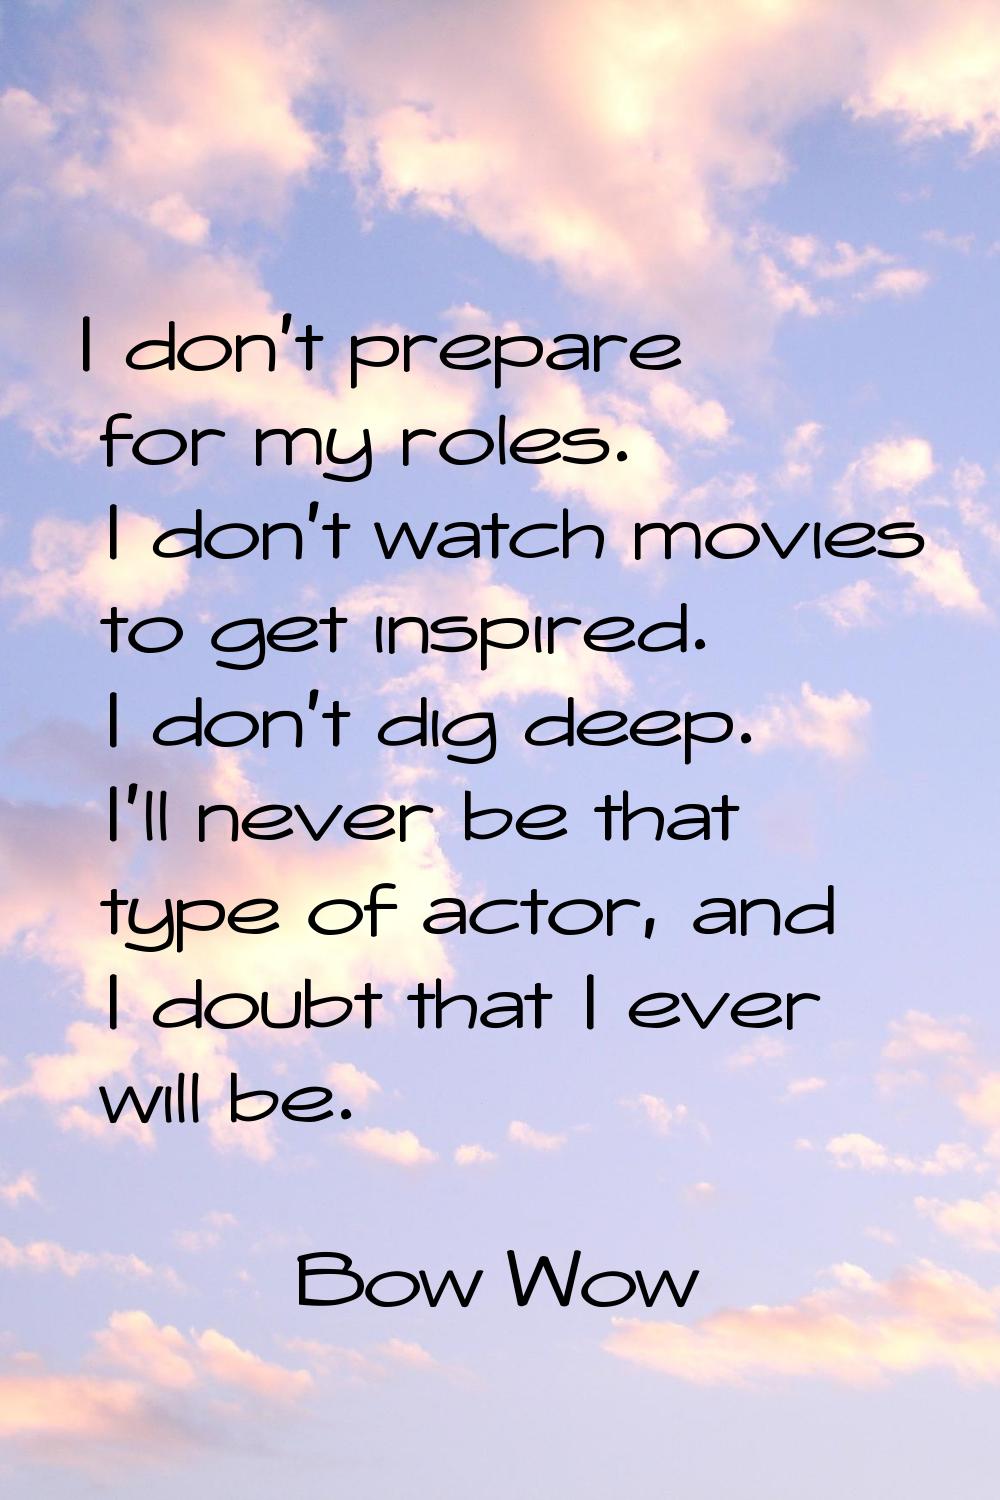 I don't prepare for my roles. I don't watch movies to get inspired. I don't dig deep. I'll never be